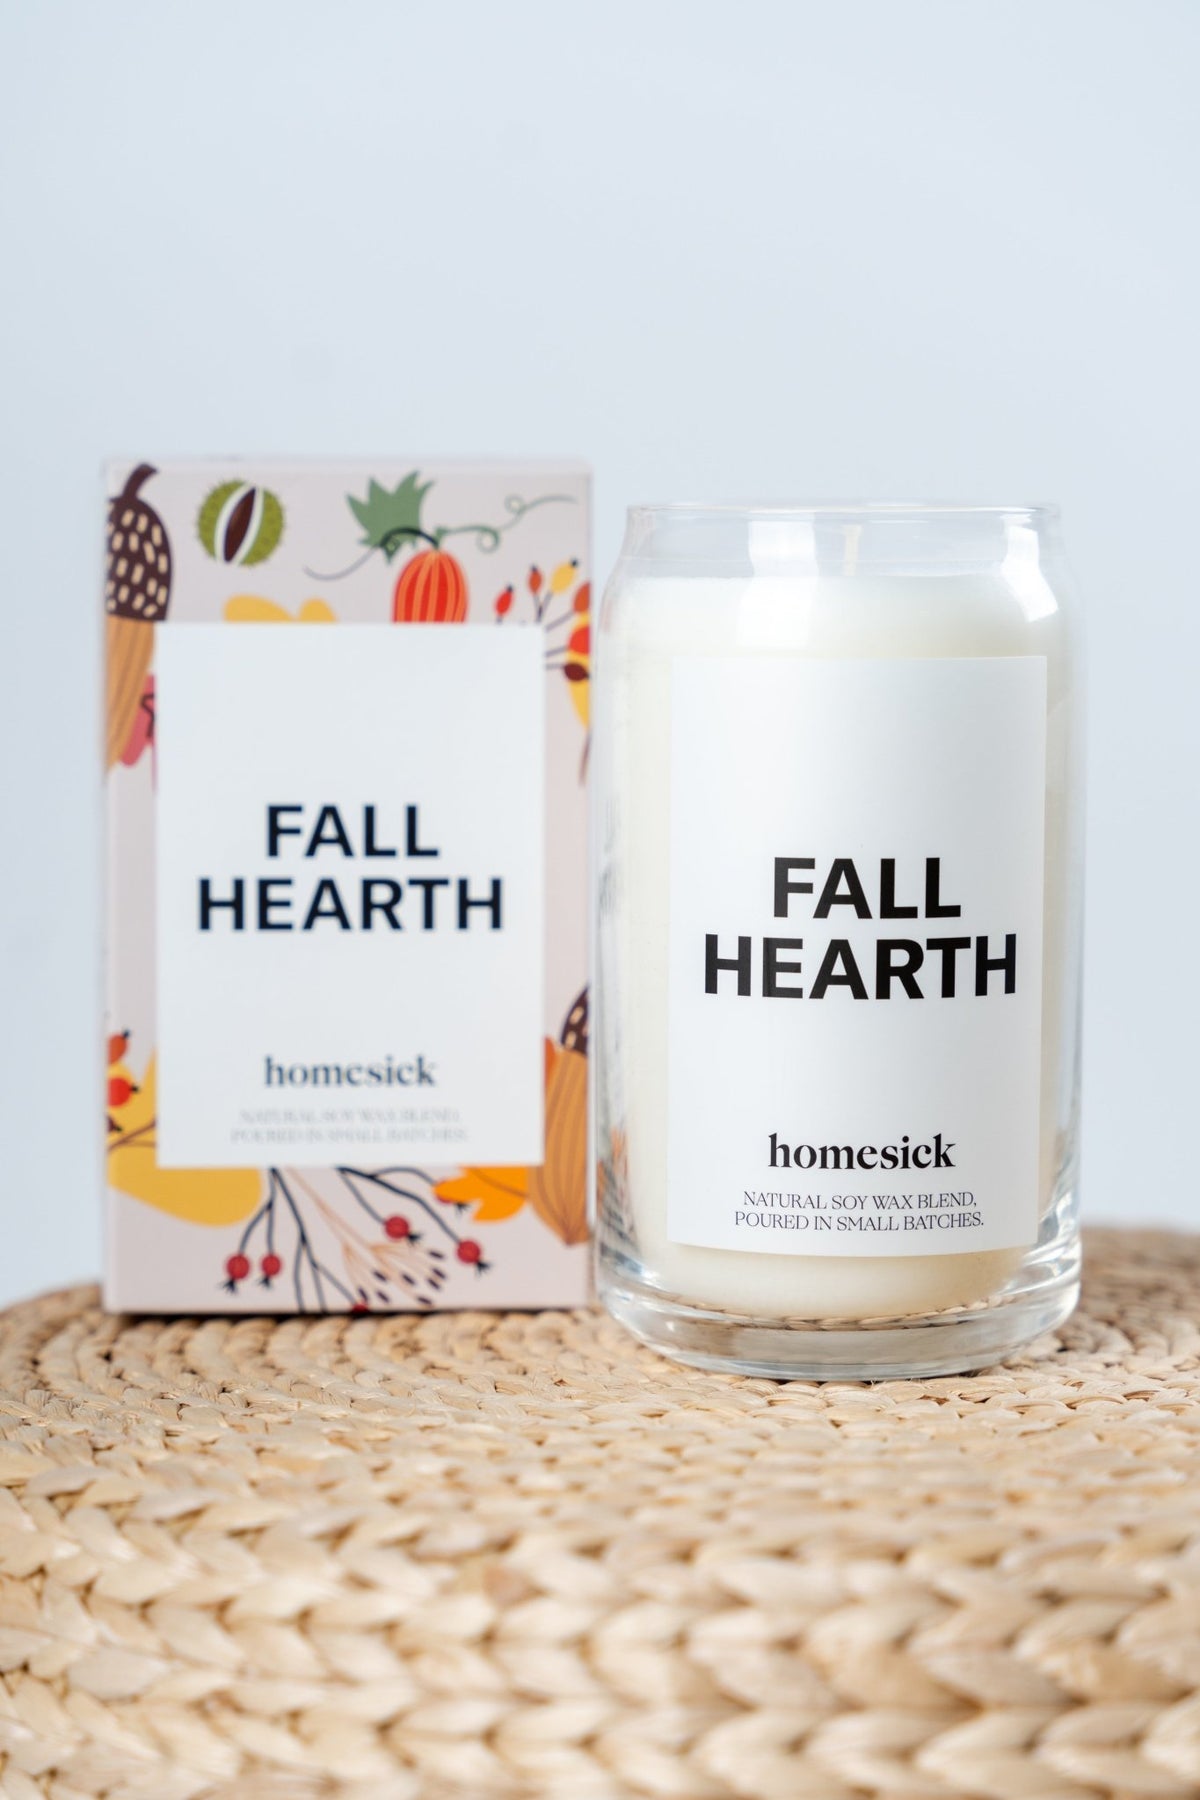 Homesick Fall hearth candle - Trendy Candles at Lush Fashion Lounge Boutique in Oklahoma City